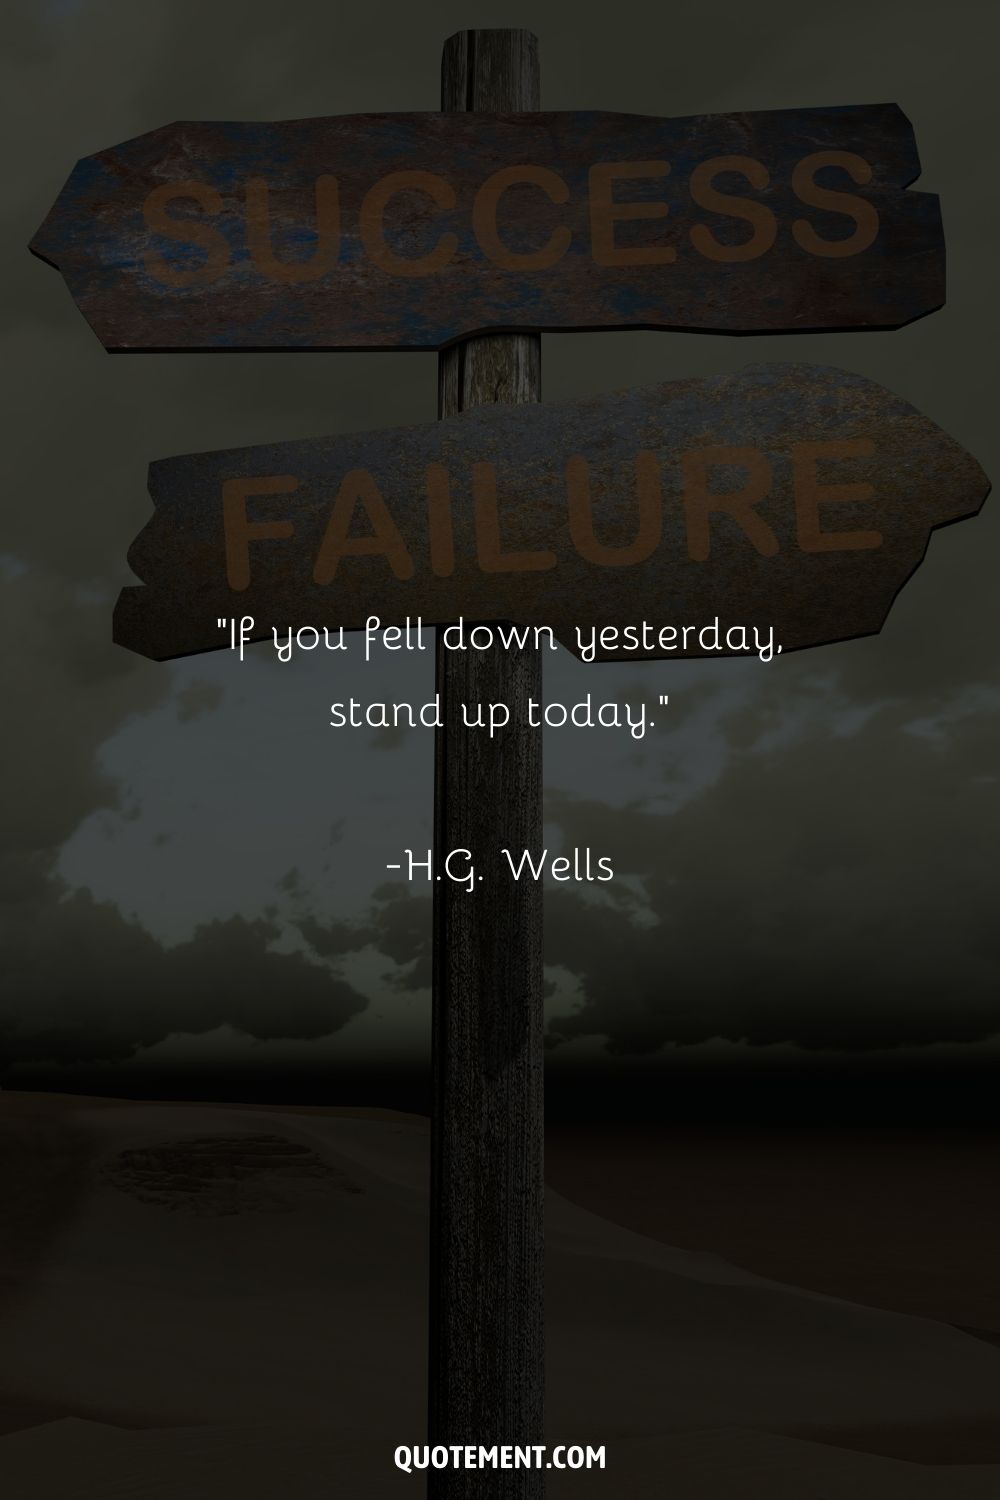 “If you fell down yesterday, stand up today.” ― H.G. Wells